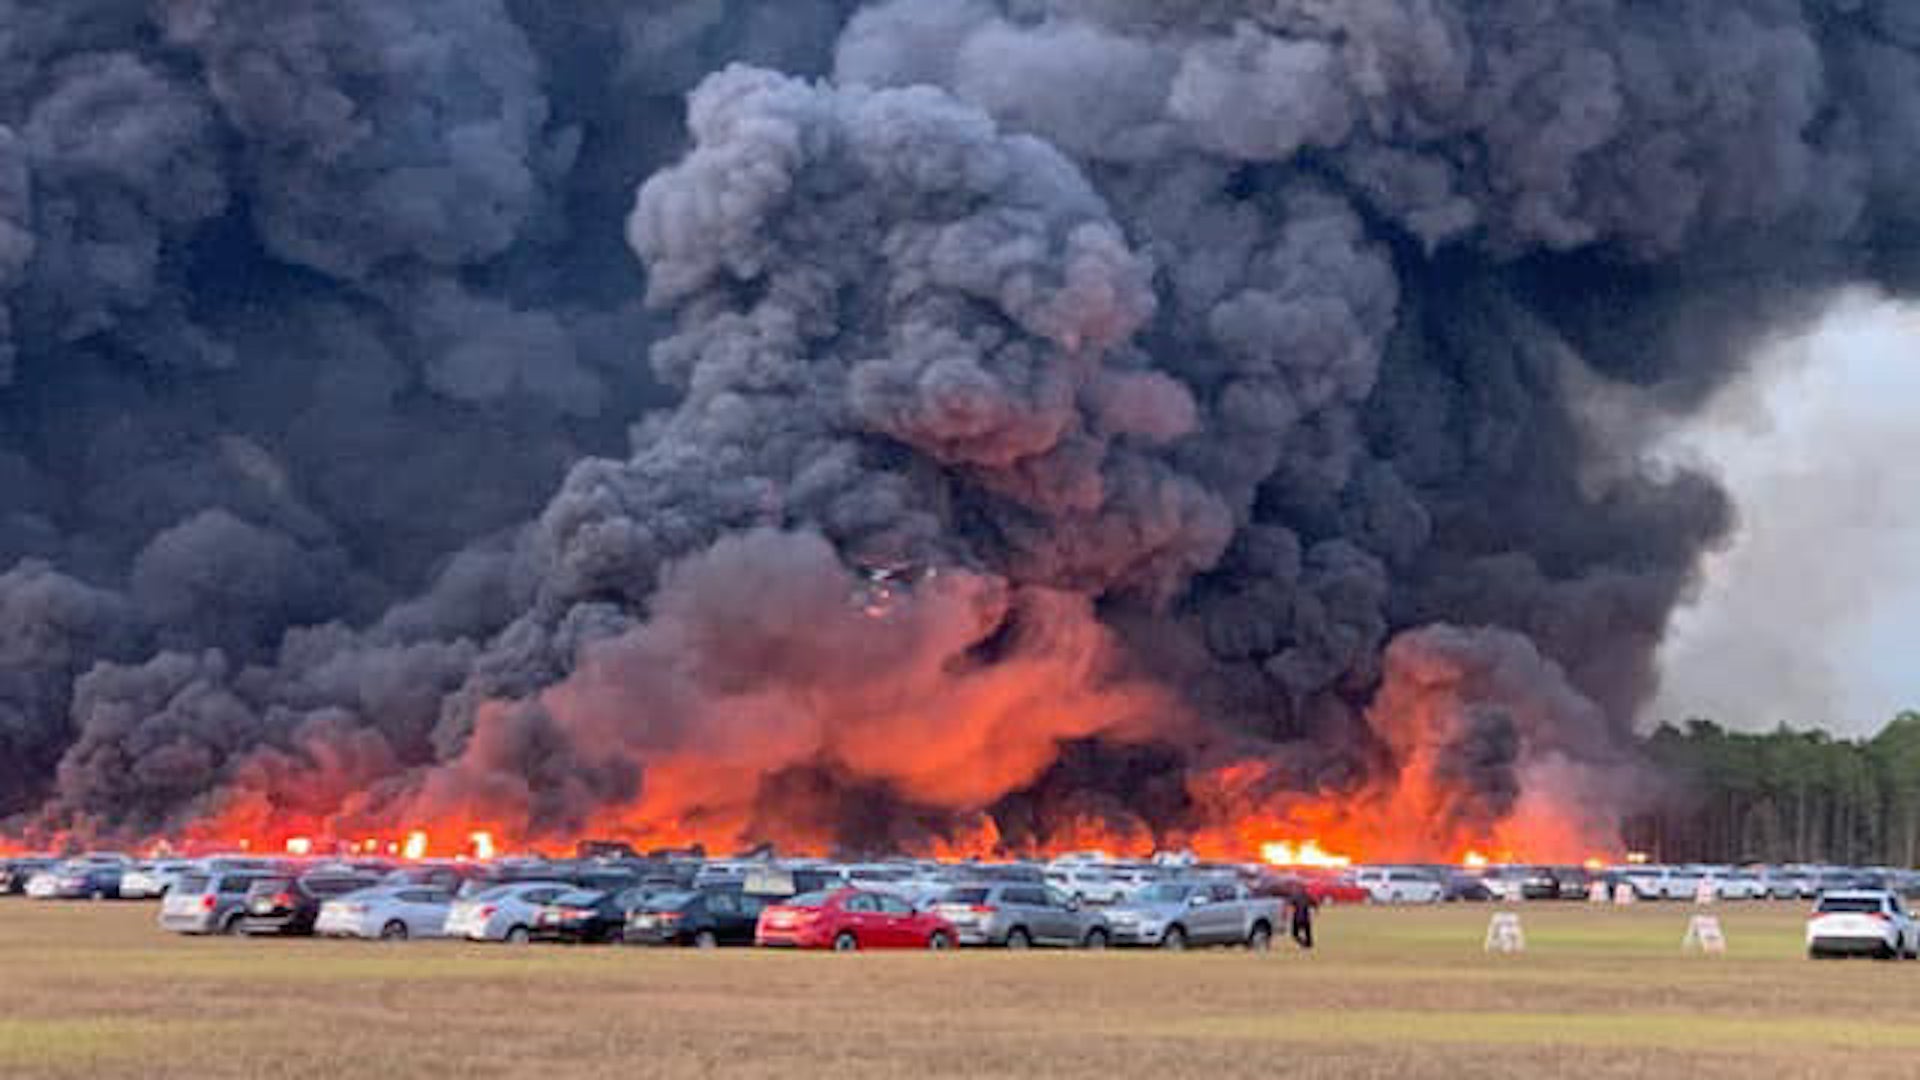 Florida Brush Fire Burns Over 3,500 Airport Rental Cars at the Stake